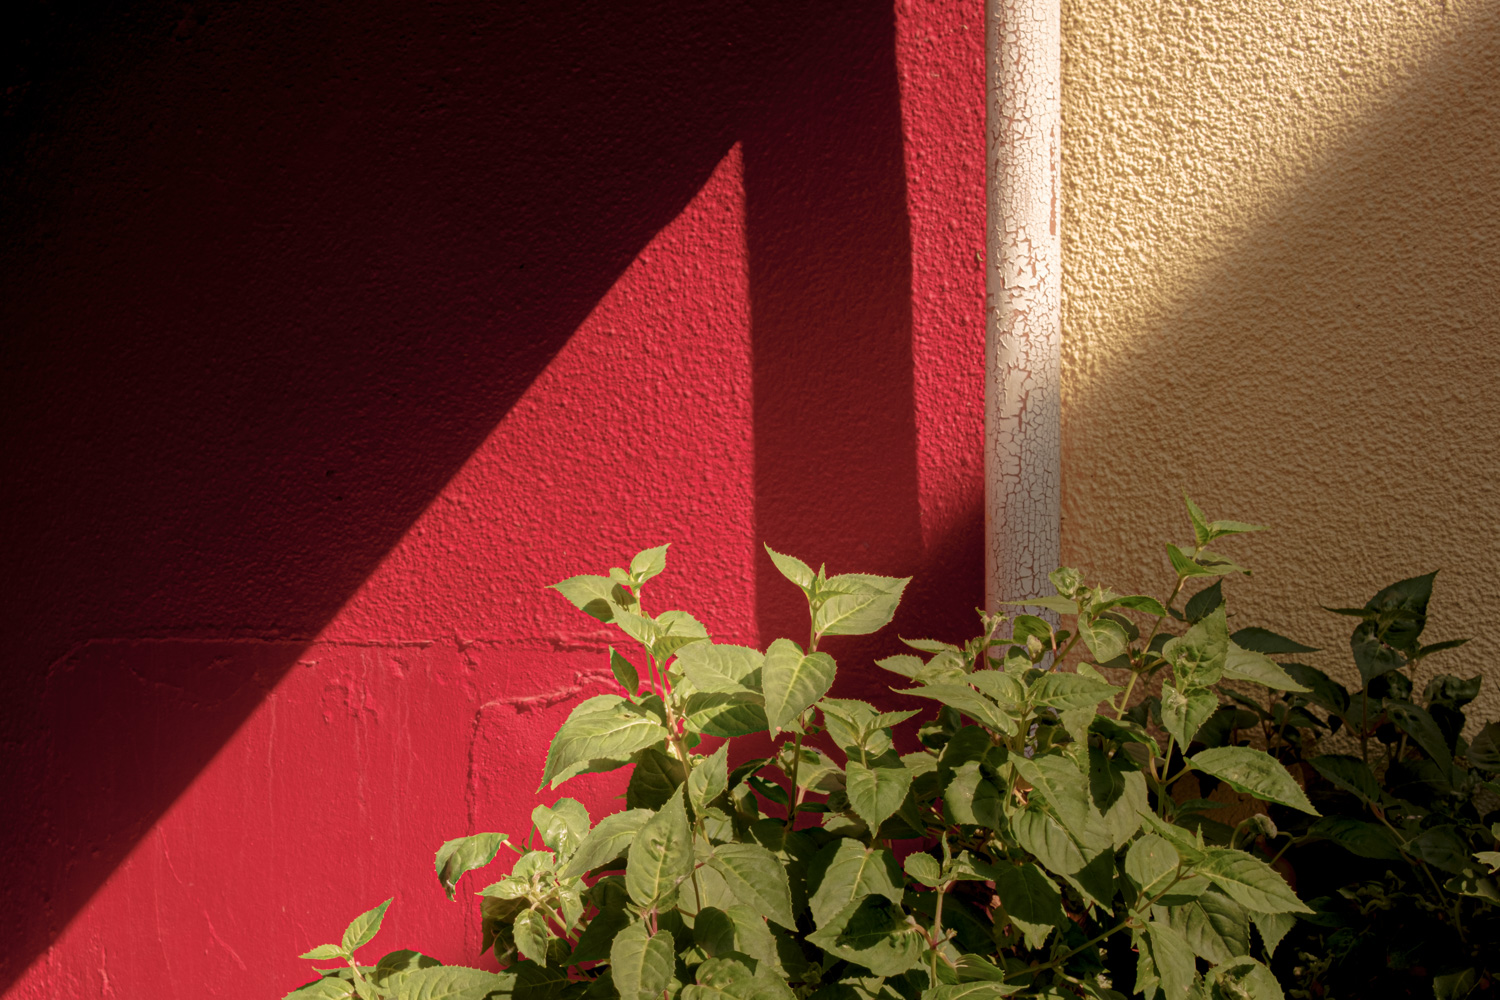 Sunlit red wall and foliage outside Fuego, Coombe St, Lyme Regis 21_05_23